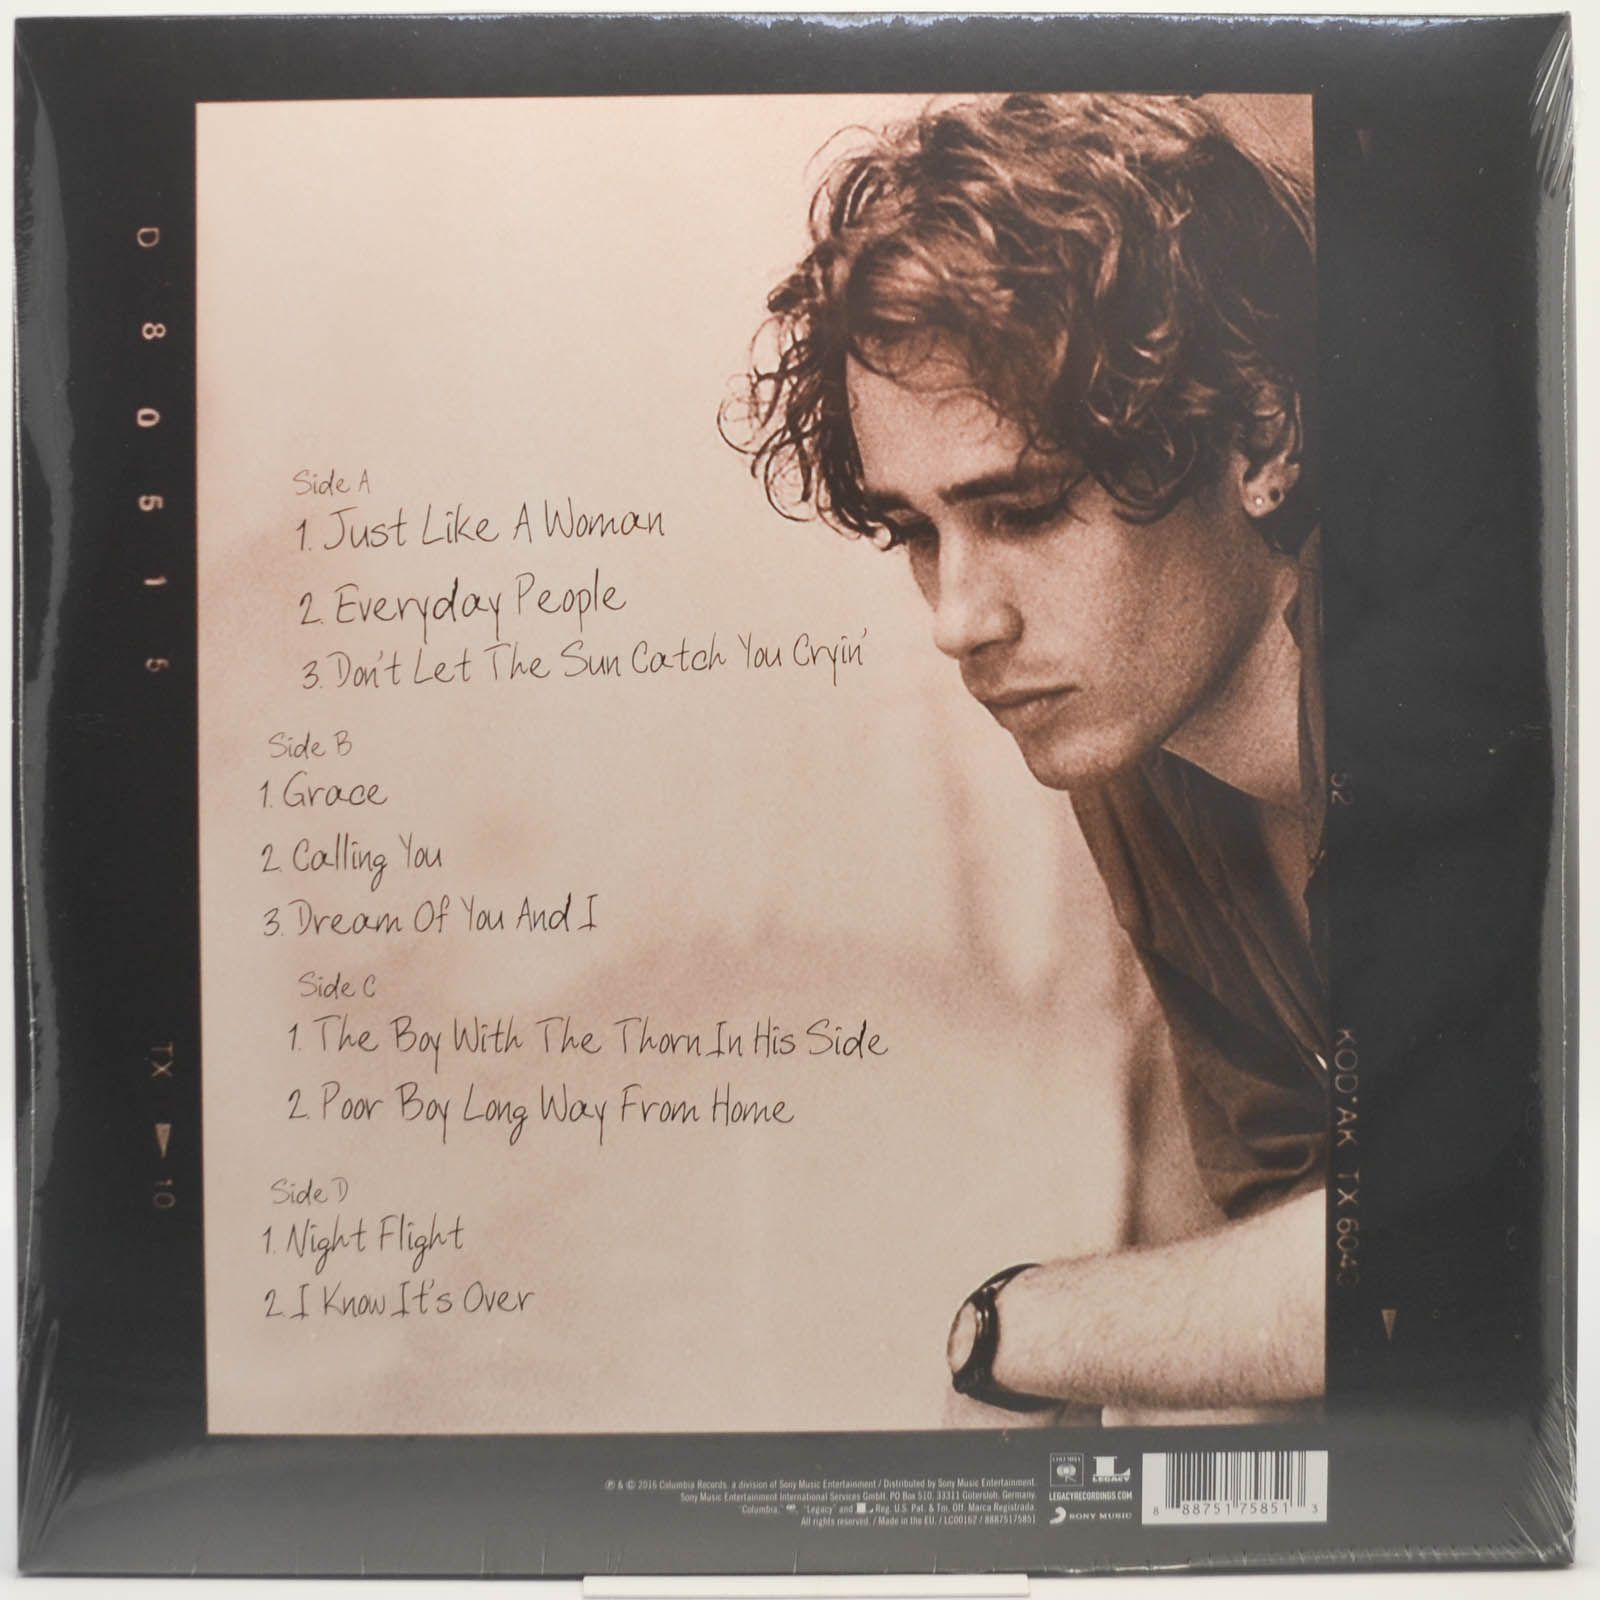 Jeff Buckley — You And I (2LP), 2016